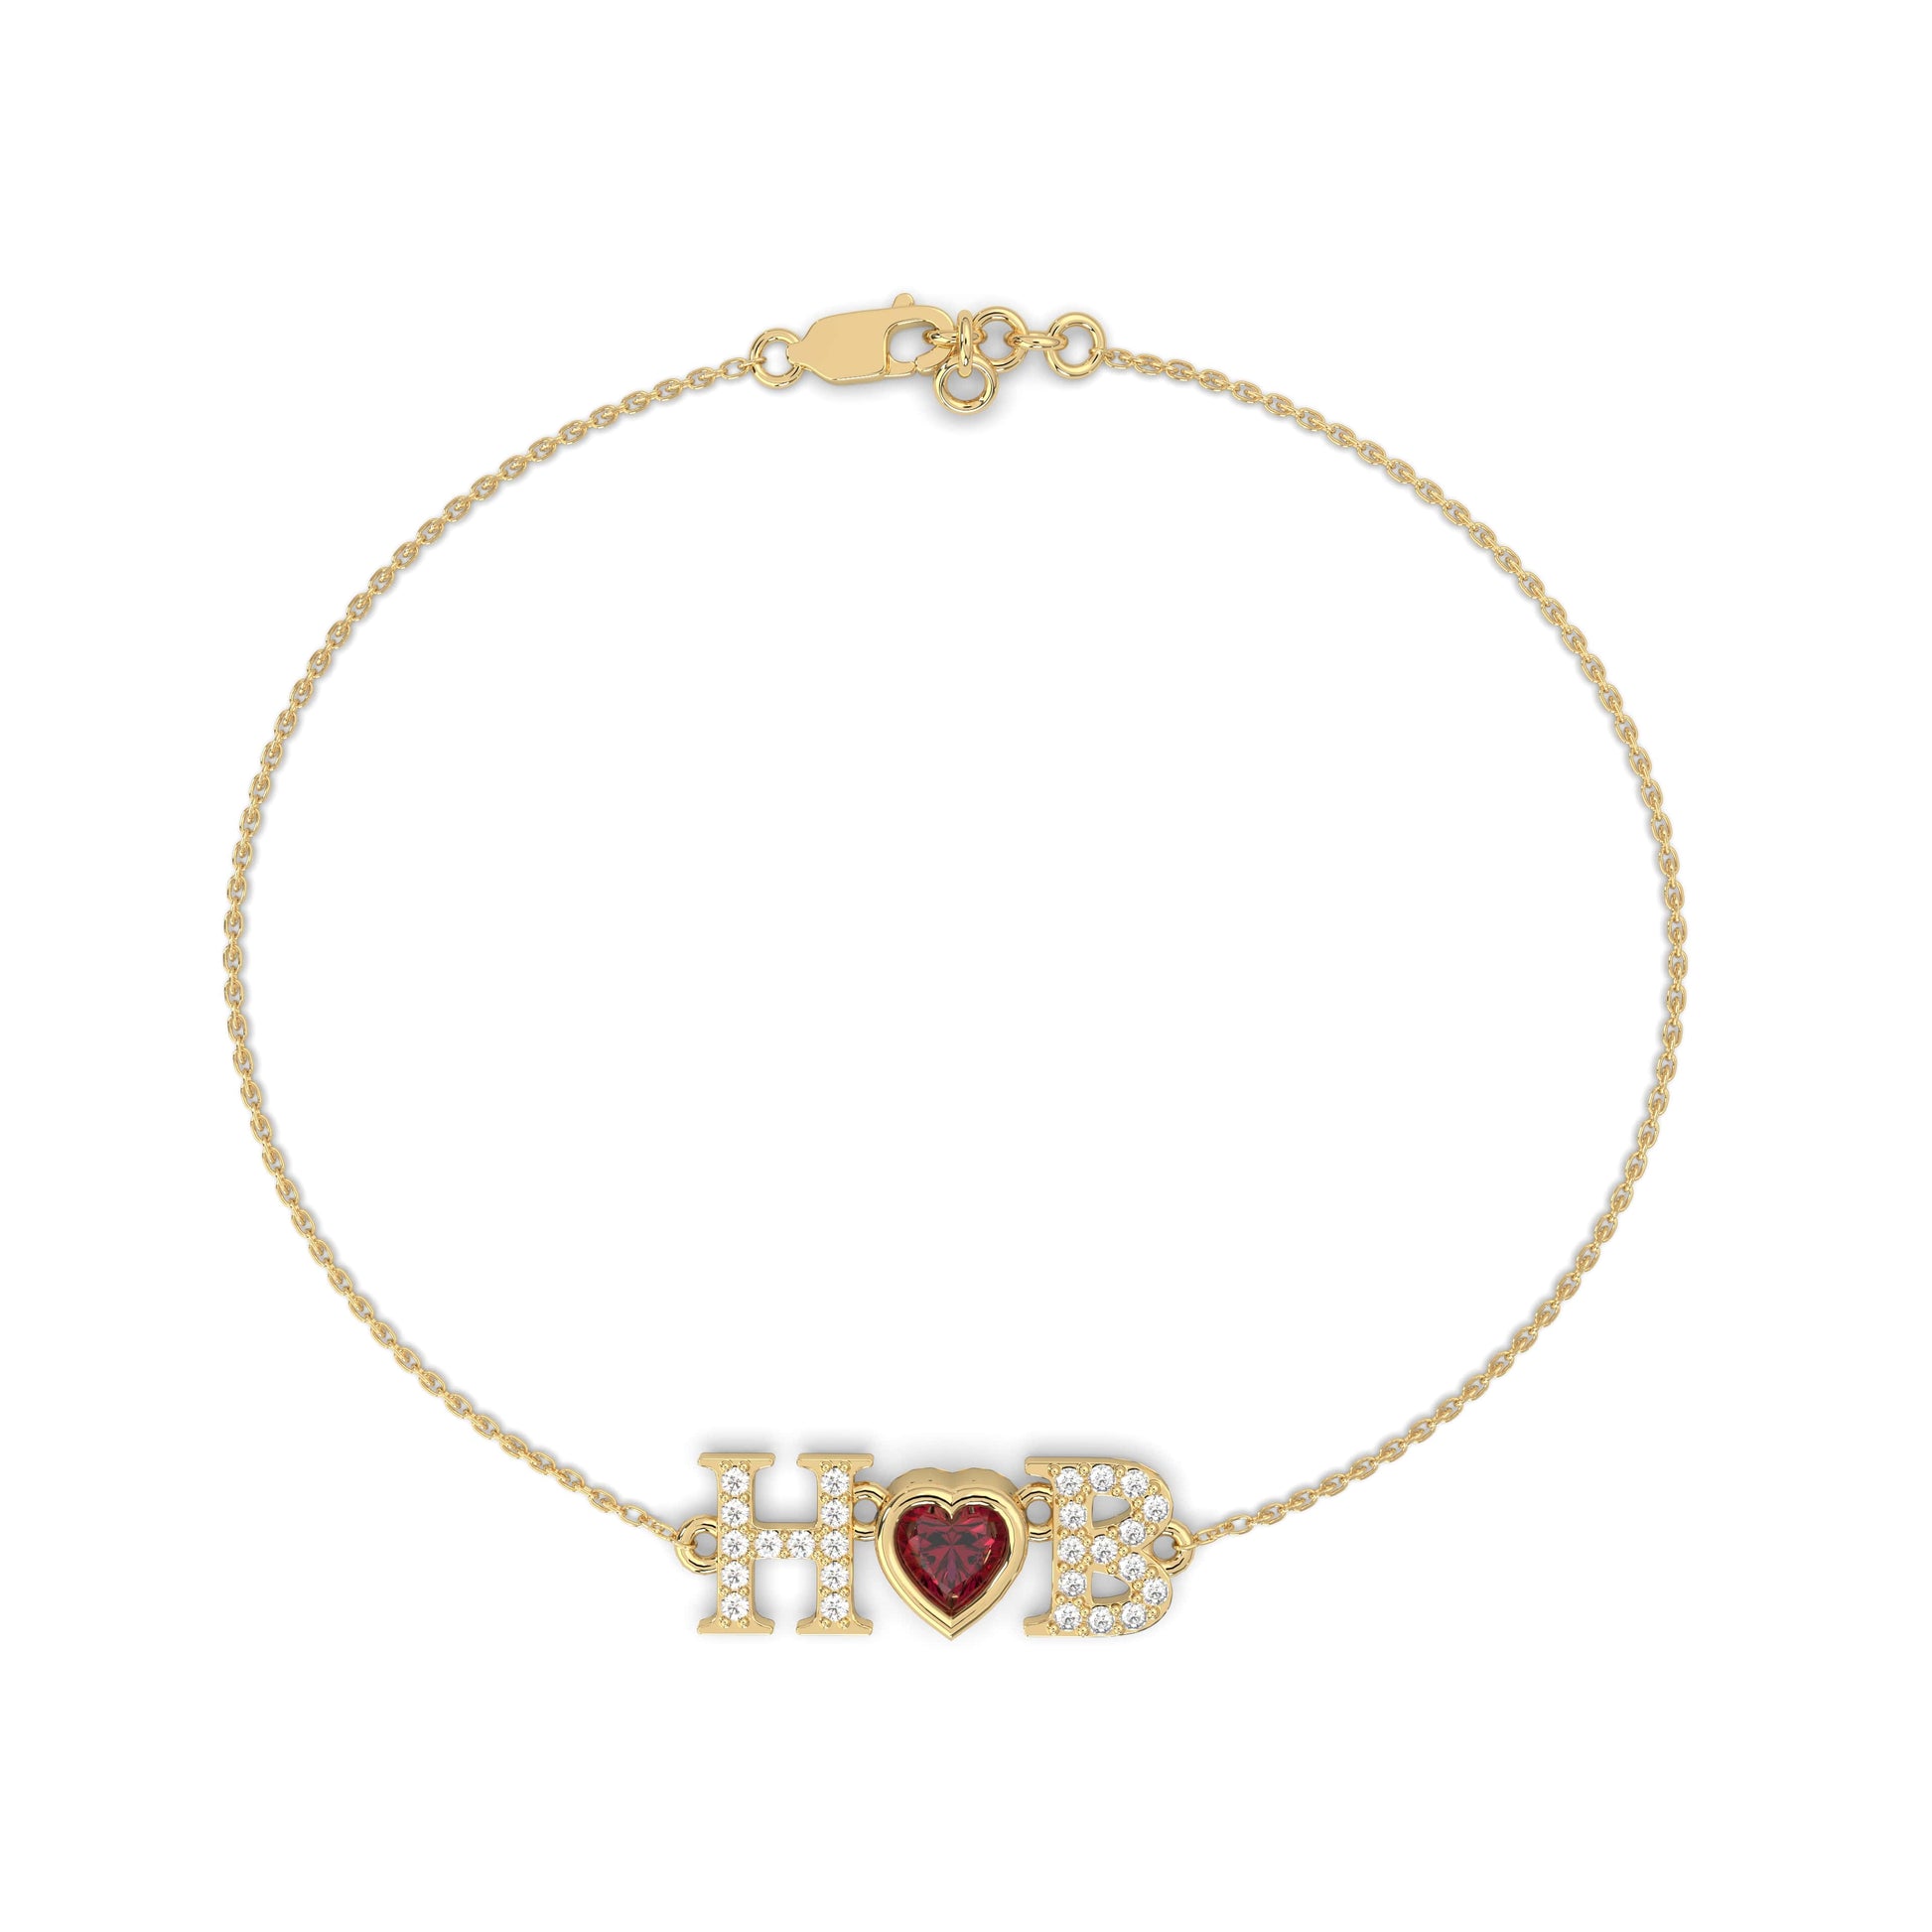 Heart bracelet with initial